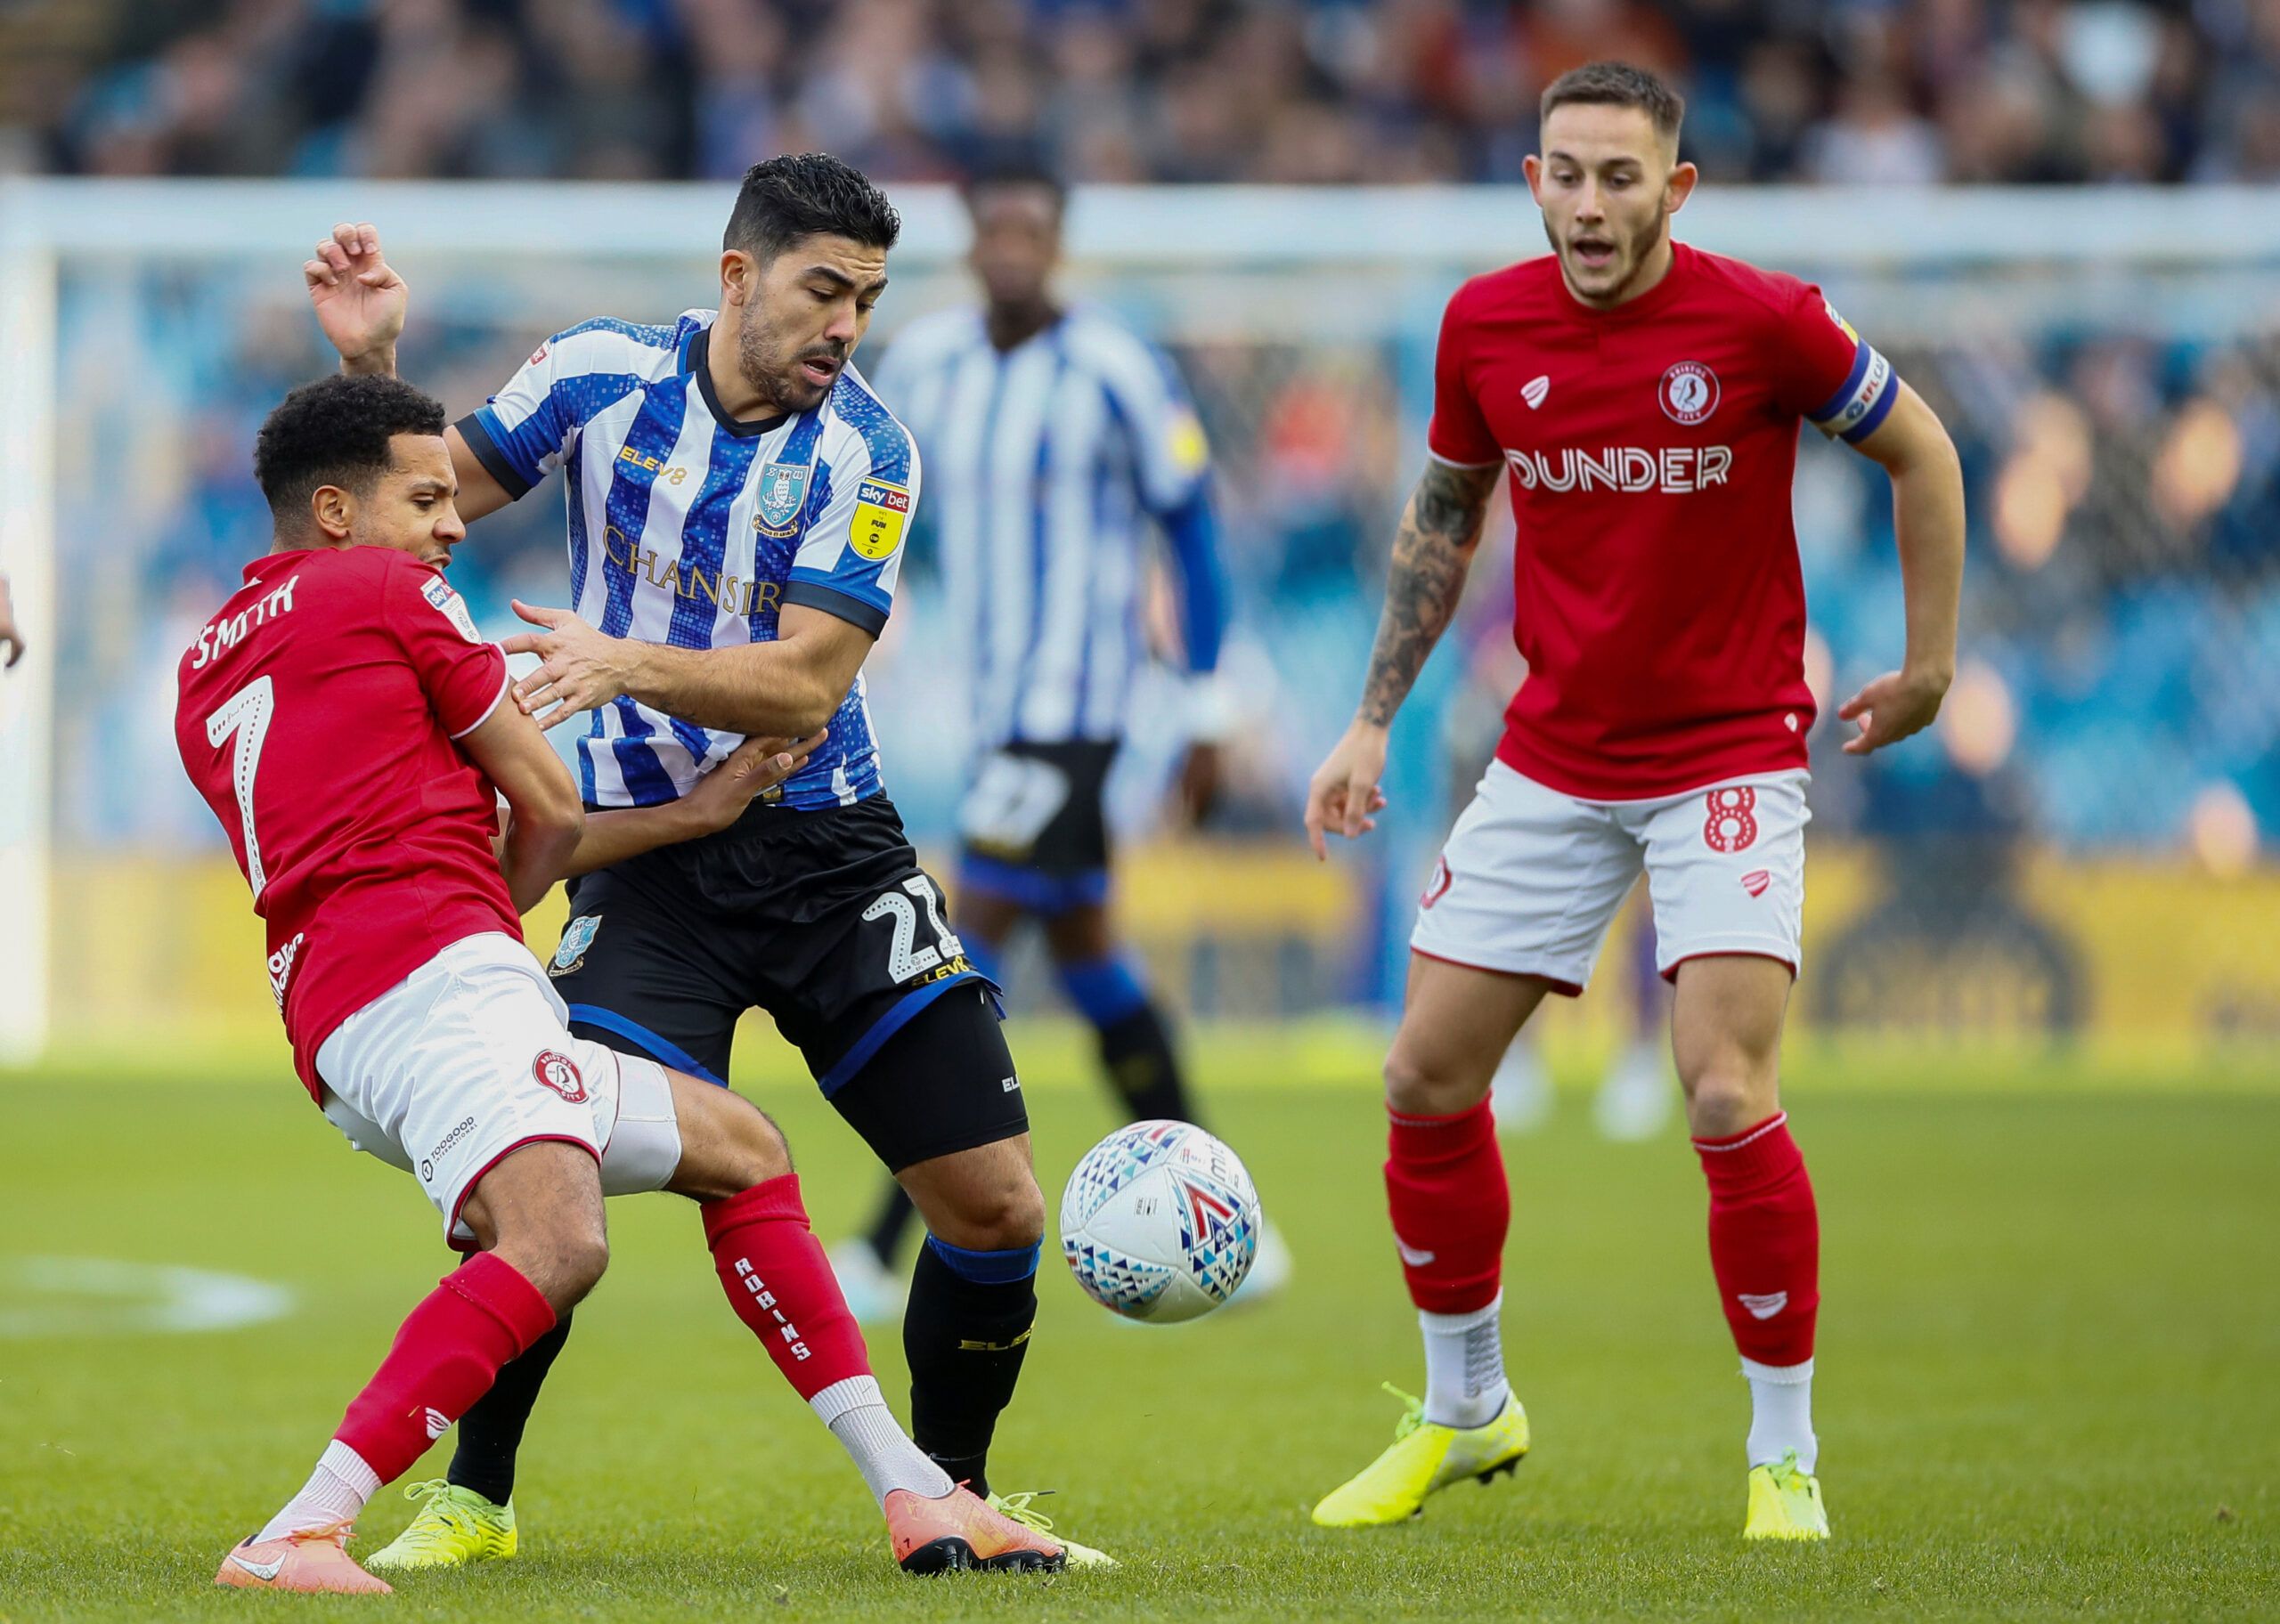 Soccer Football - Championship - Sheffield Wednesday v Bristol City - Hillsborough, Sheffield, Britain - December 22, 2019   Sheffield Wednesday's Massimo Luongo in action with Bristol City's Korey Smith   Action Images/Jason Cairnduff    EDITORIAL USE ONLY. No use with unauthorized audio, video, data, fixture lists, club/league logos or 